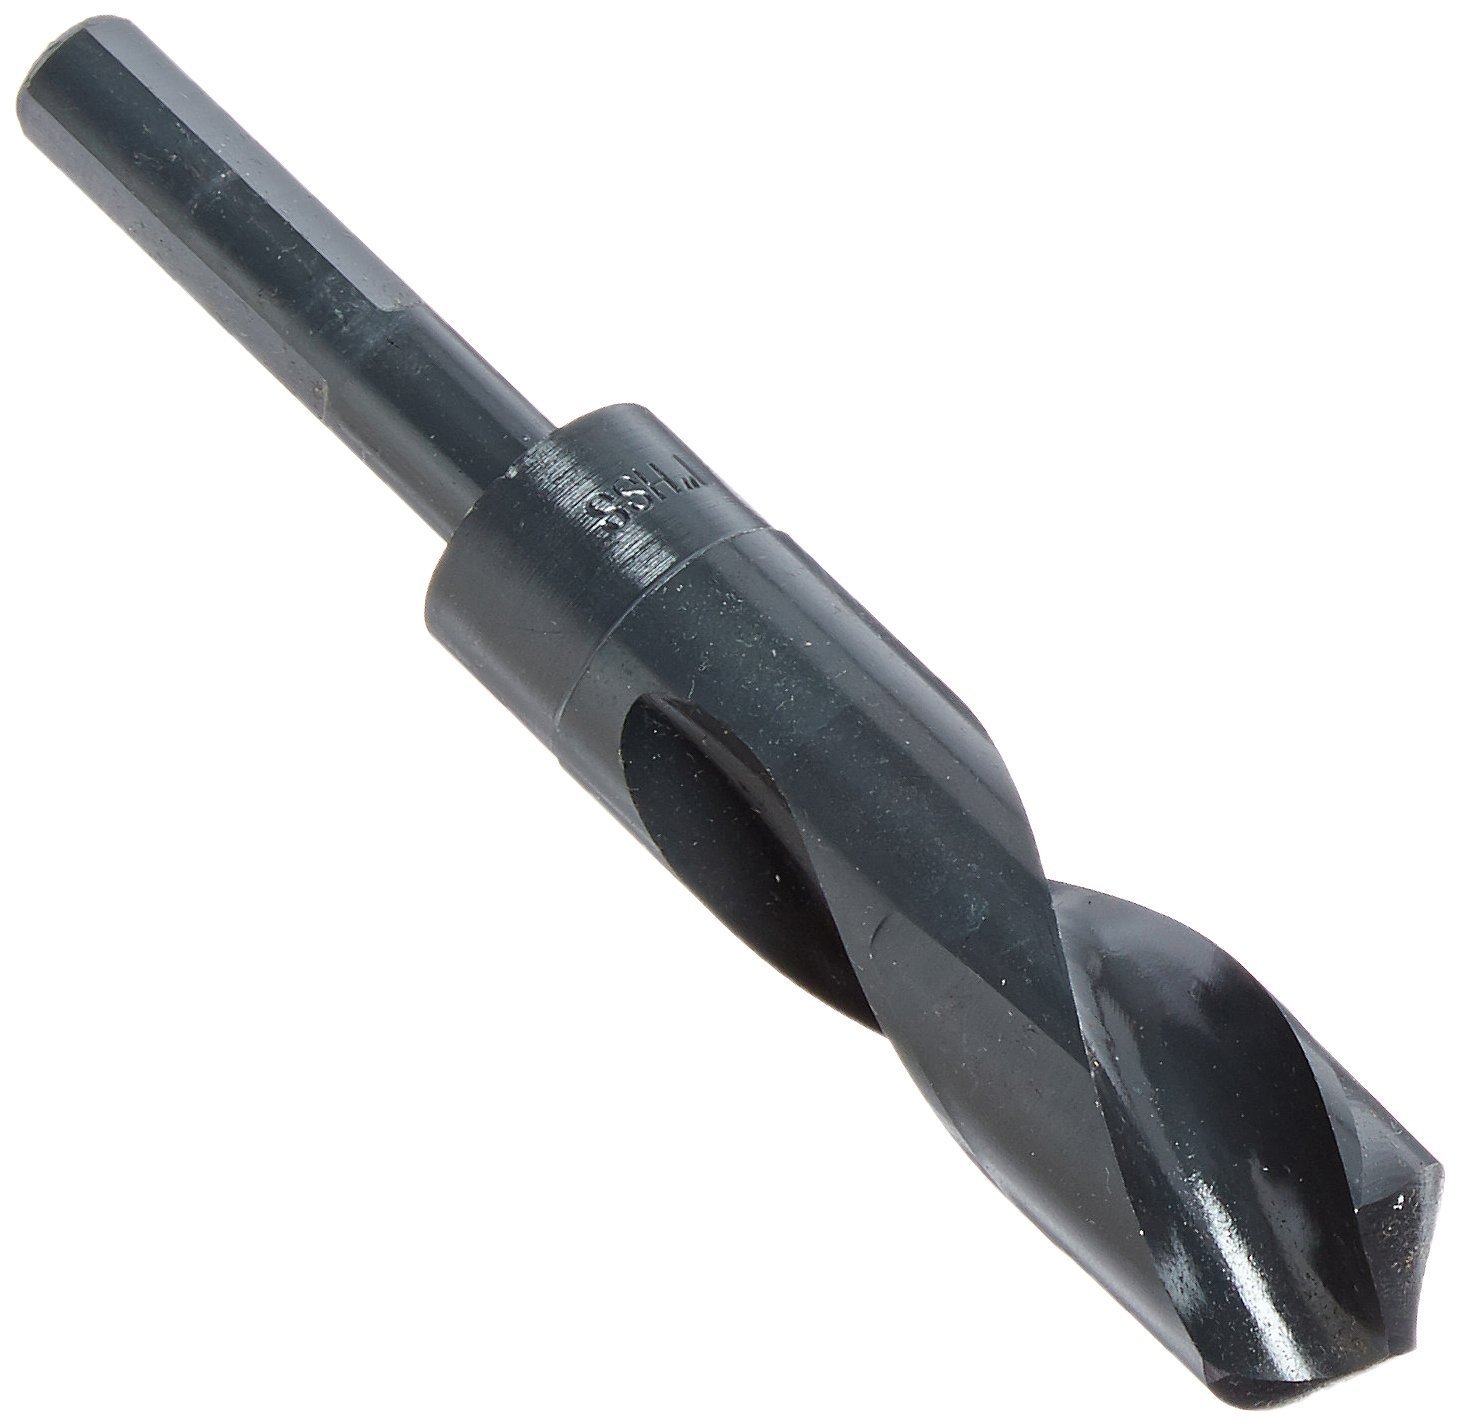 Drill America High Speed Steel Reduced Shank Drill Bit, (33/64" - 1-1/2" by 64ths) Black Oxide Finish, Conventional 118 Degree Point, DWDRSD Series